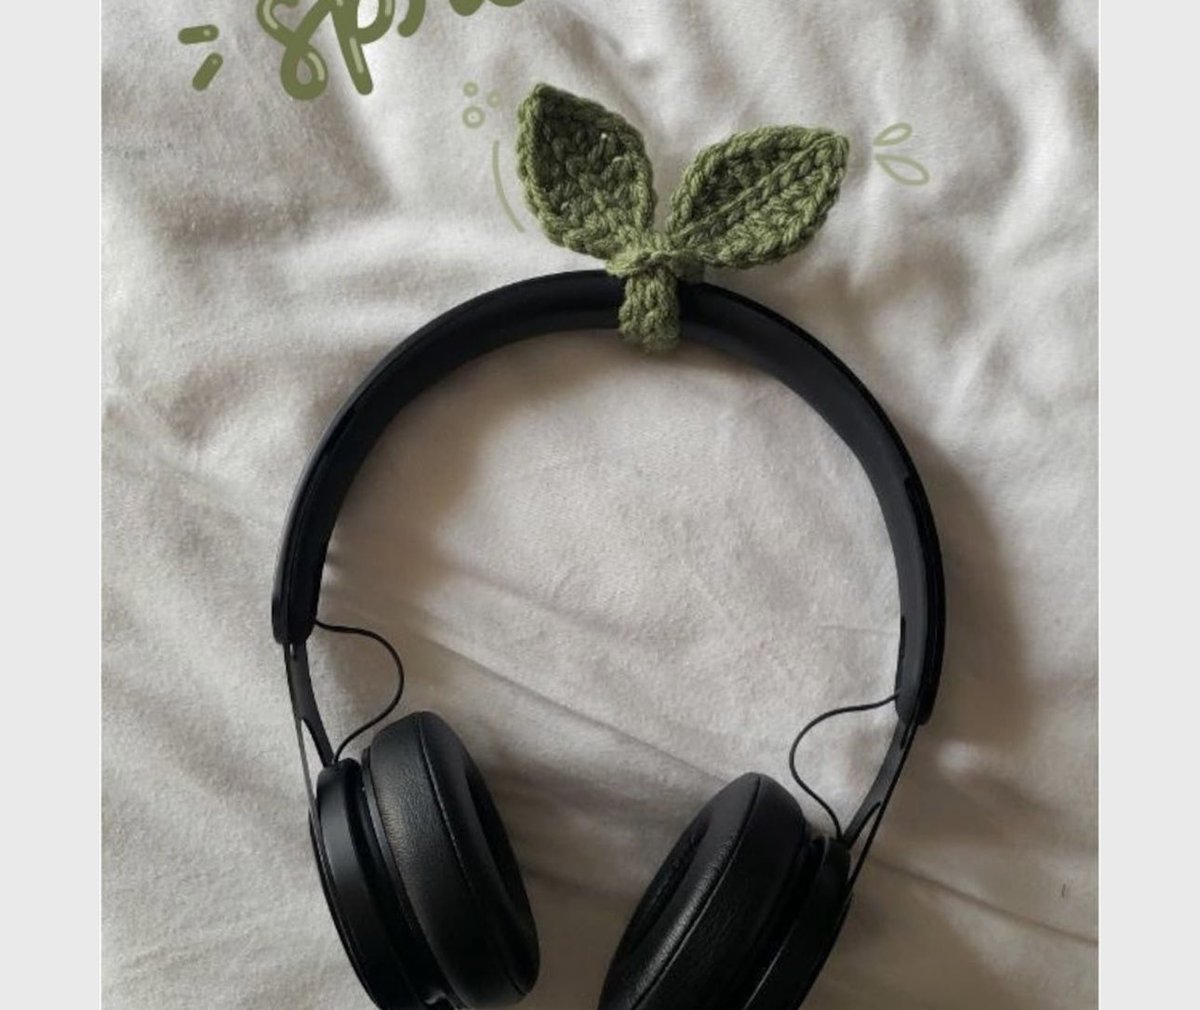 Someone pls make me one of these cute sprouts for my new headset & ill love u forever